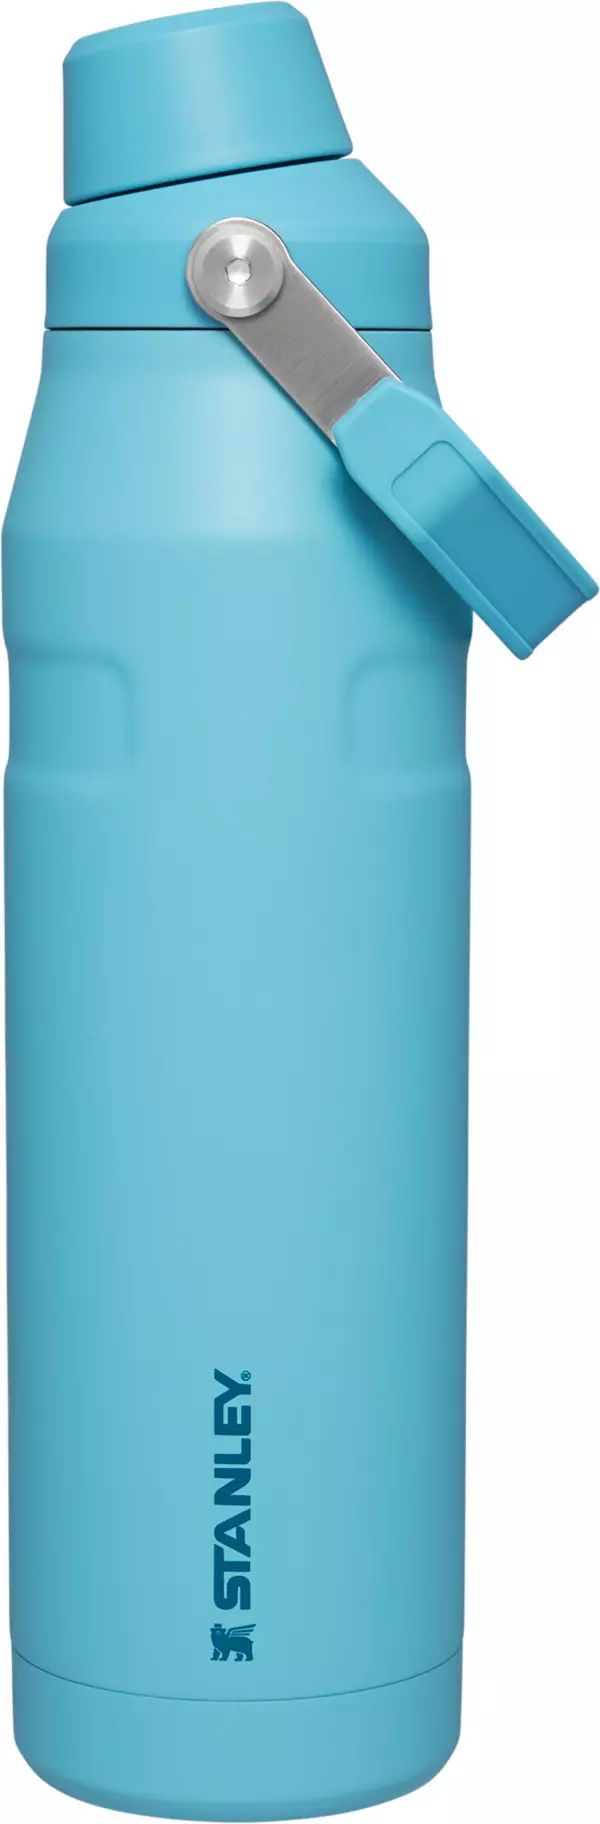 Stanley 36 oz. AeroLight IceFlow Bottle with Fast Flow Lid | Dick's Sporting Goods